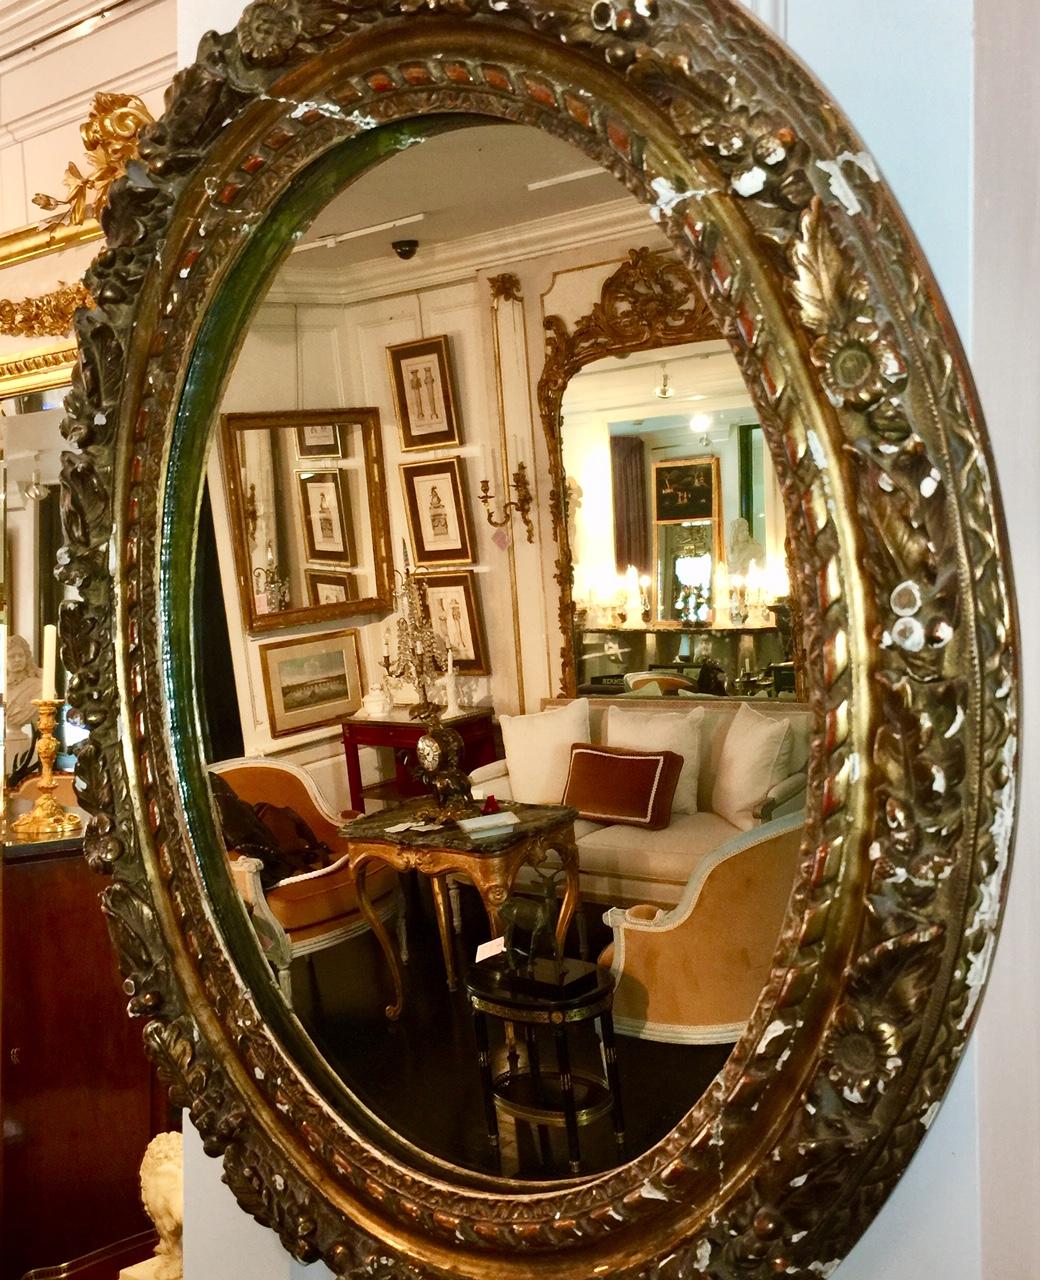 French, neoclassic style. This antique French Louis XVI period, 18th century beveled mirror features a beautifully ornate carved gilt leaf wood frame with flowers, berries and leaves. The oval frame surrounds the original beveled mirror glass which